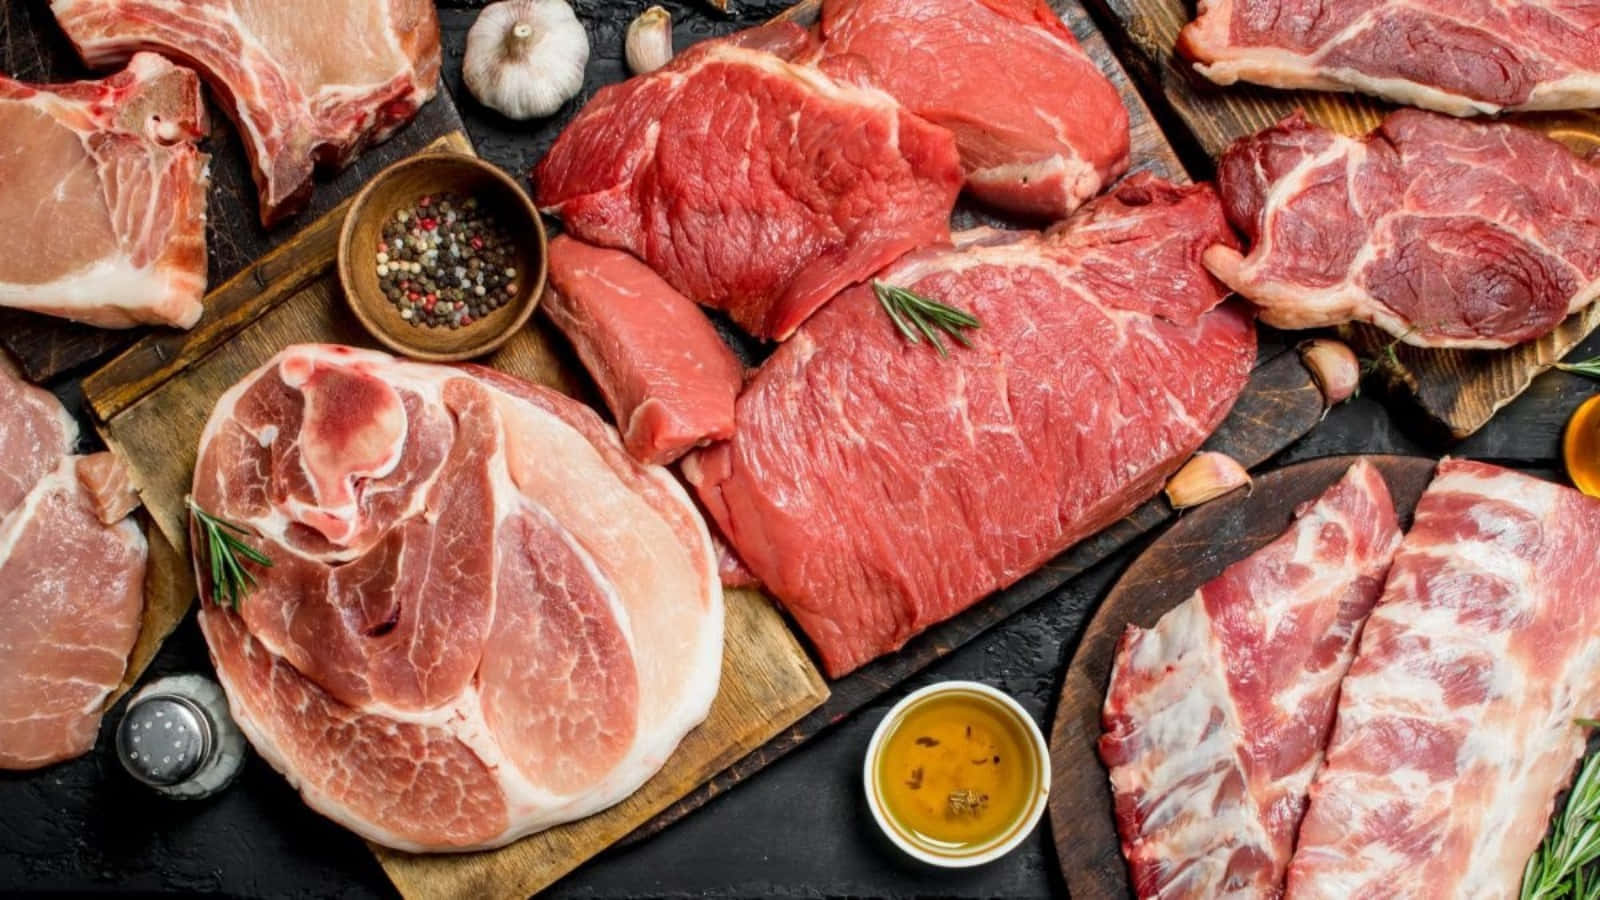 Exquisite Gourmet Meat Assortment On A Rustic Wooden Board.